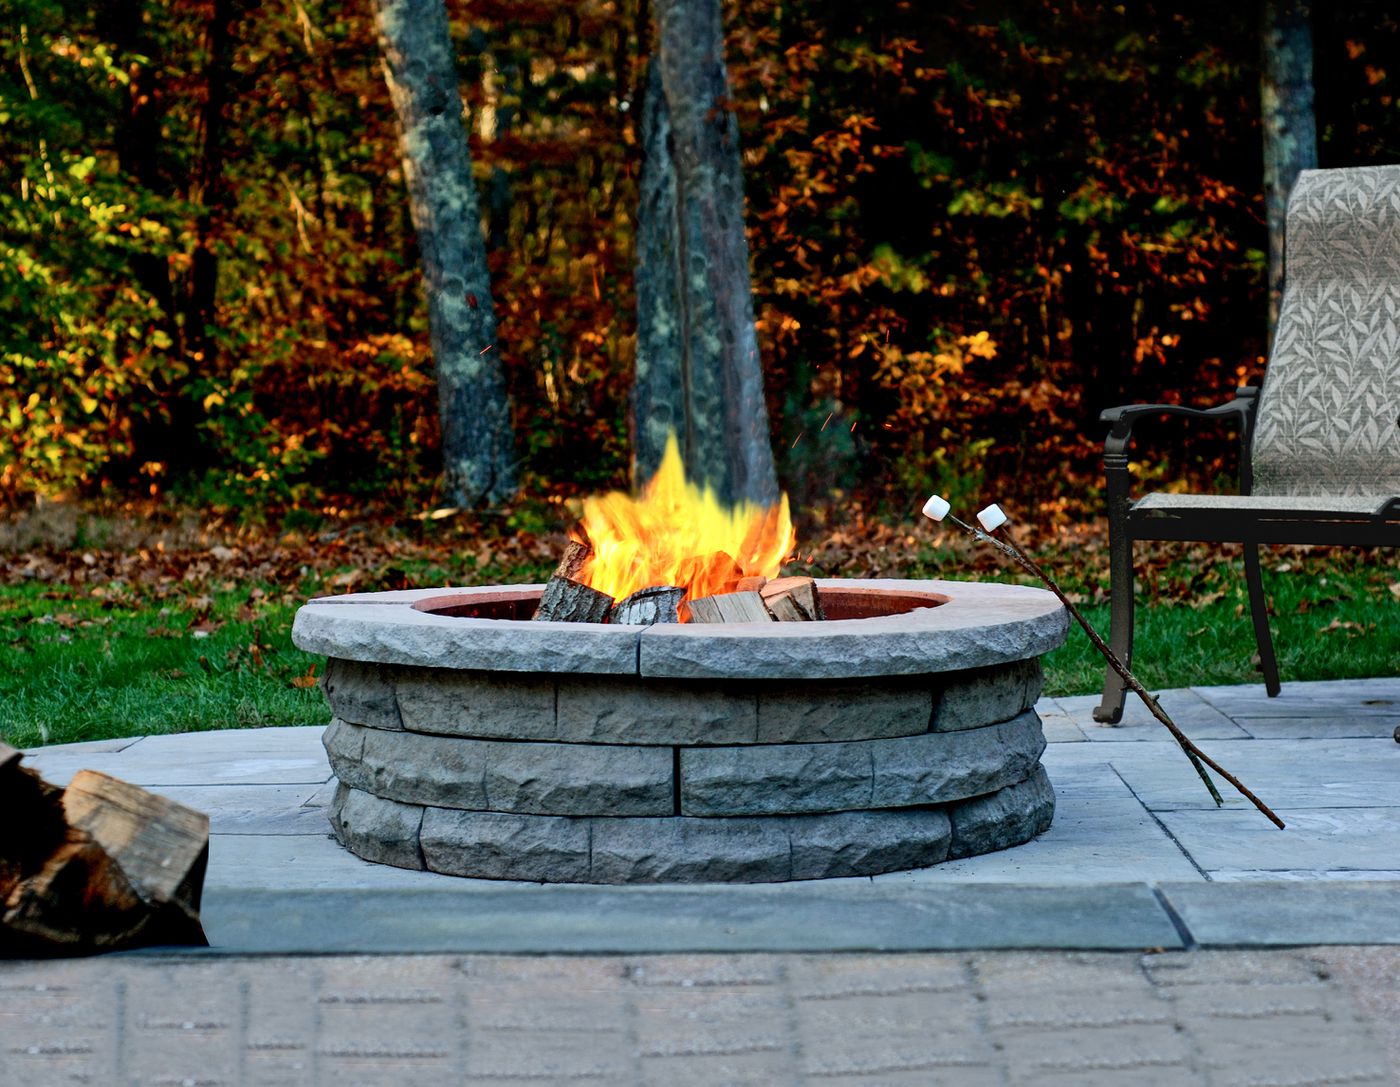 All About Fire Pits This Old House